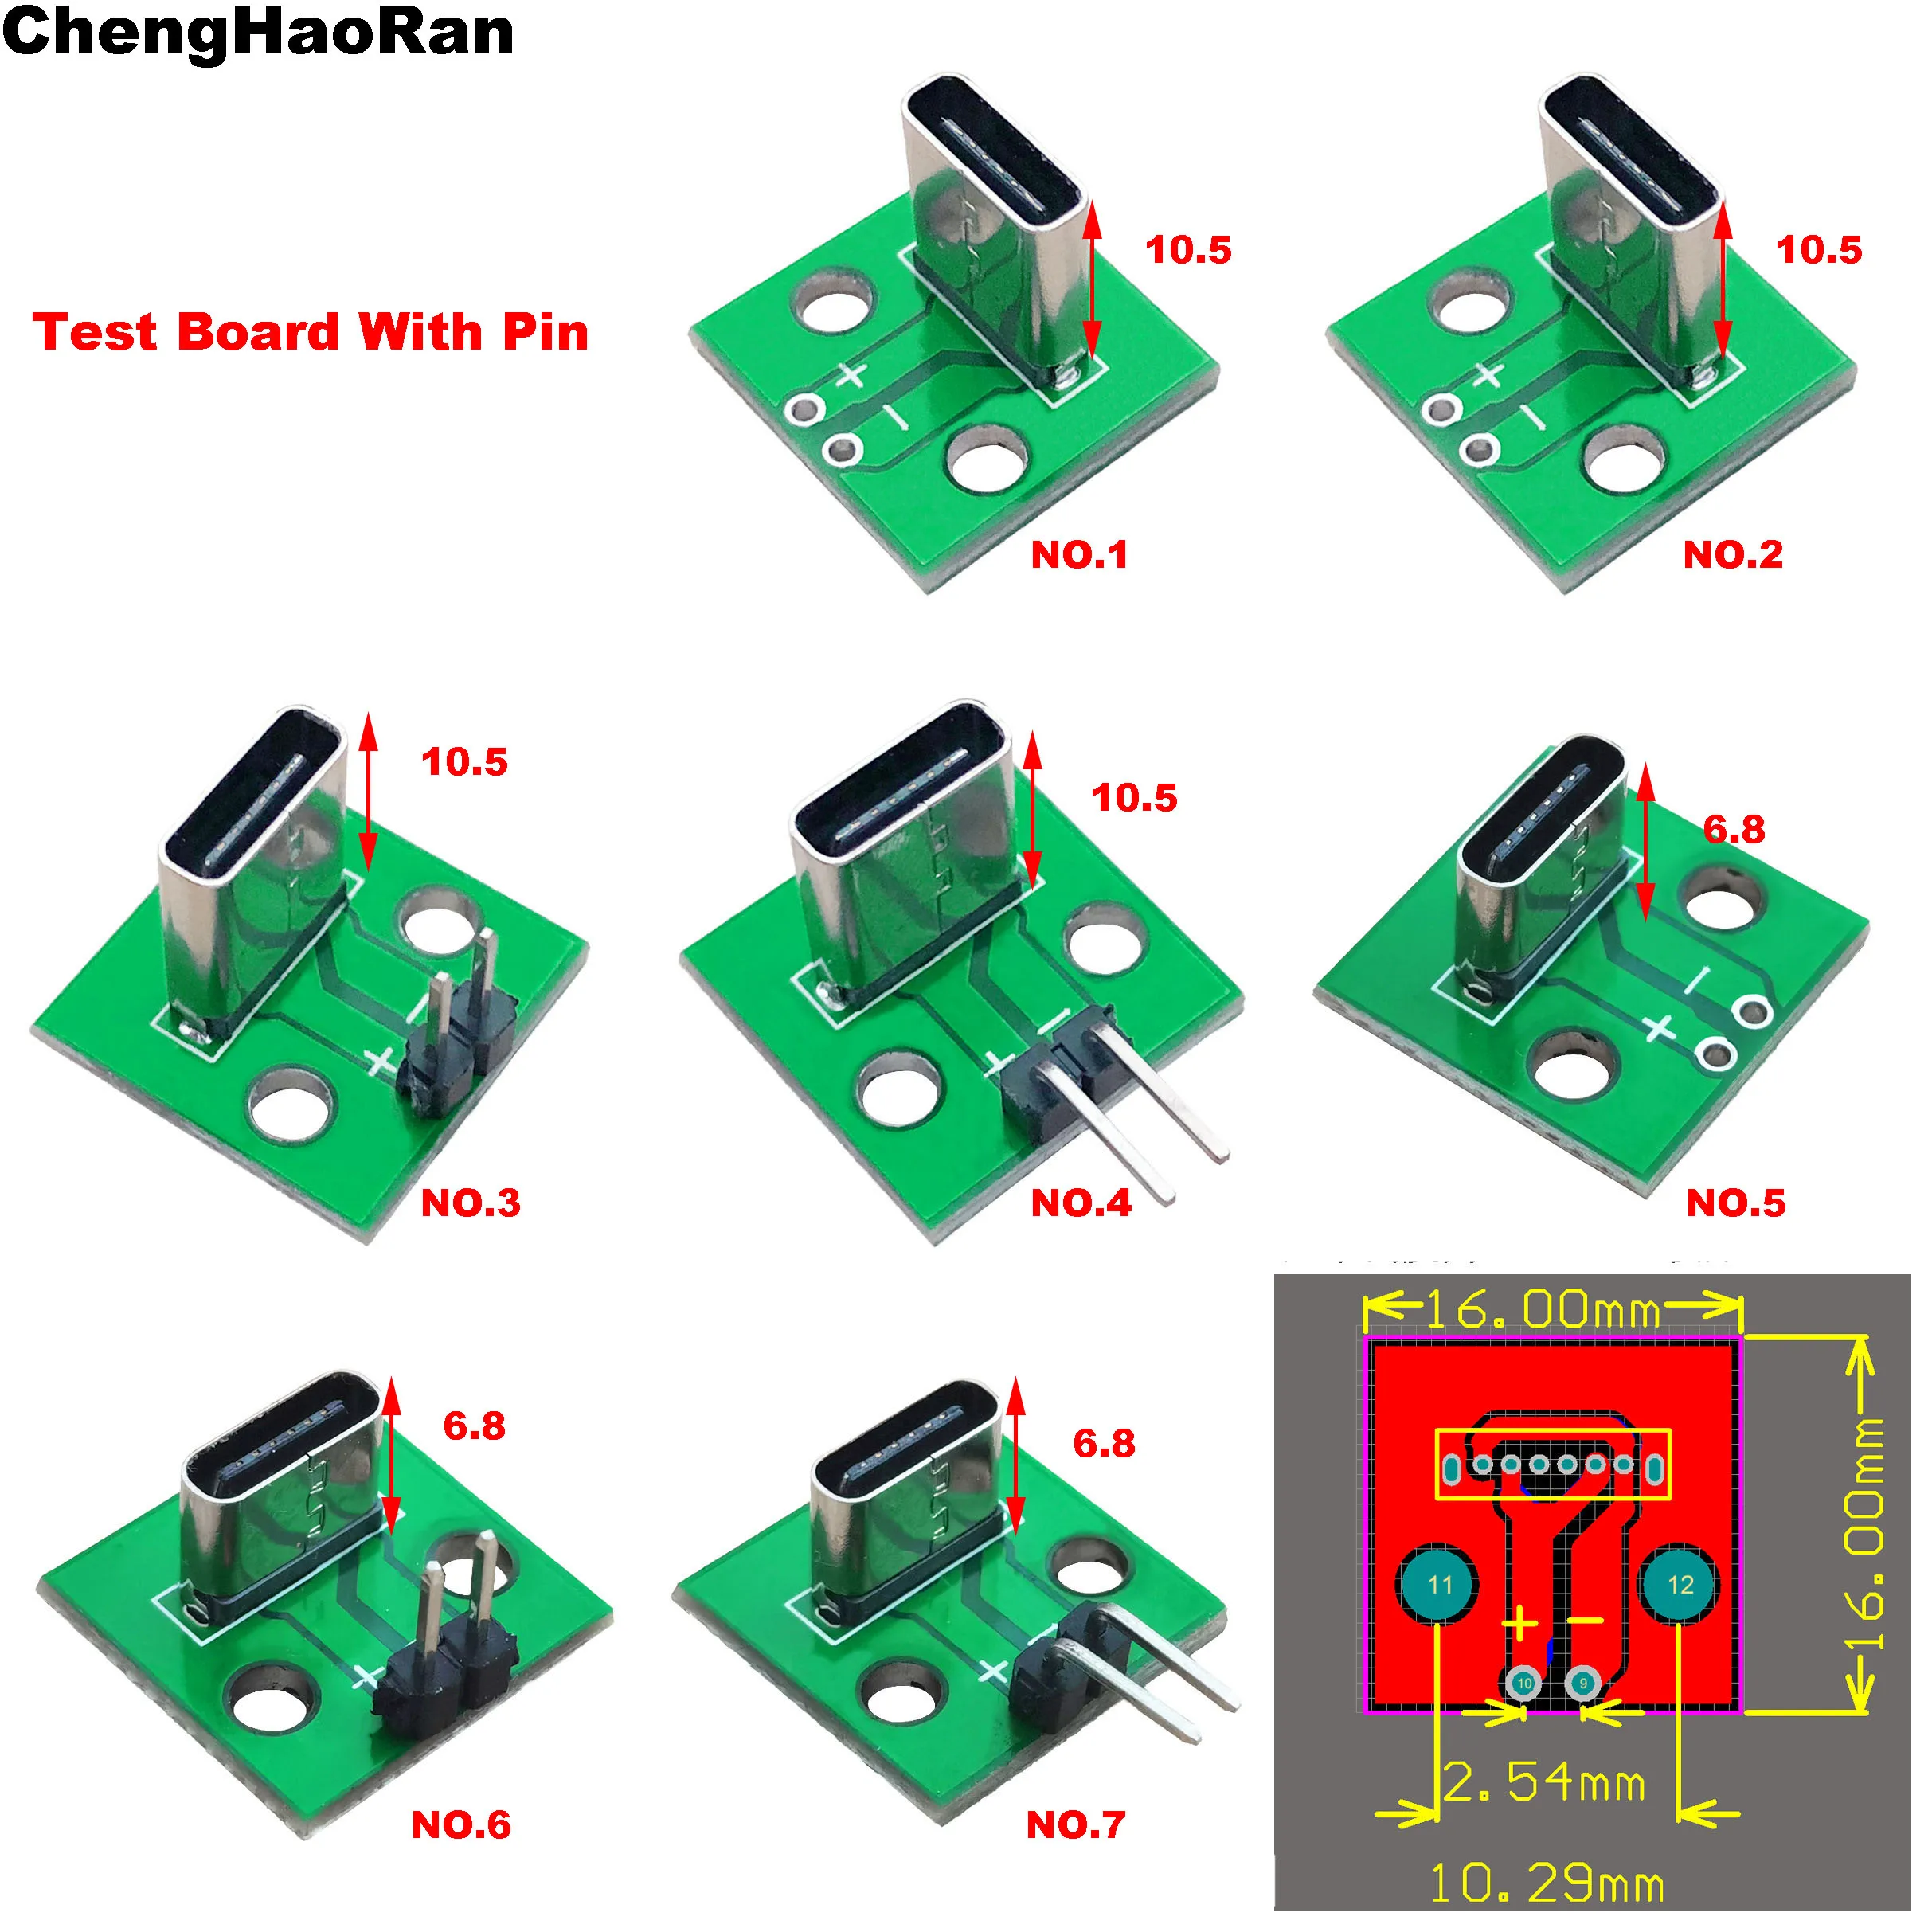 

5PCS 16x16 2.54 Data Charging Cable Jack Test Board Pin Header 90 Degree Vertical Type-C Female Connector Test PCB Board Adapter